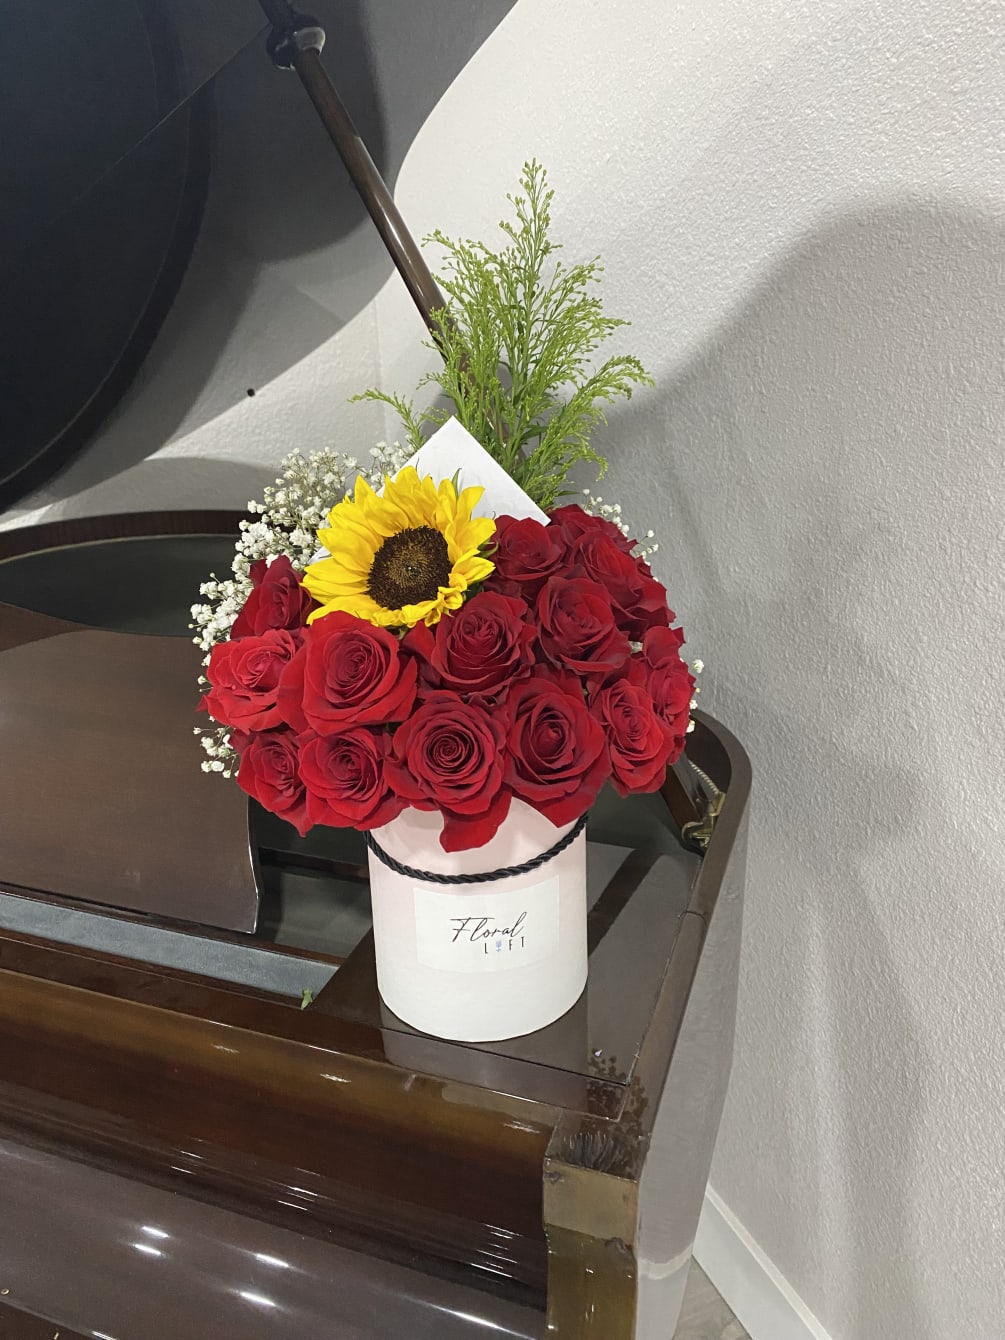 red roses and a sunflower